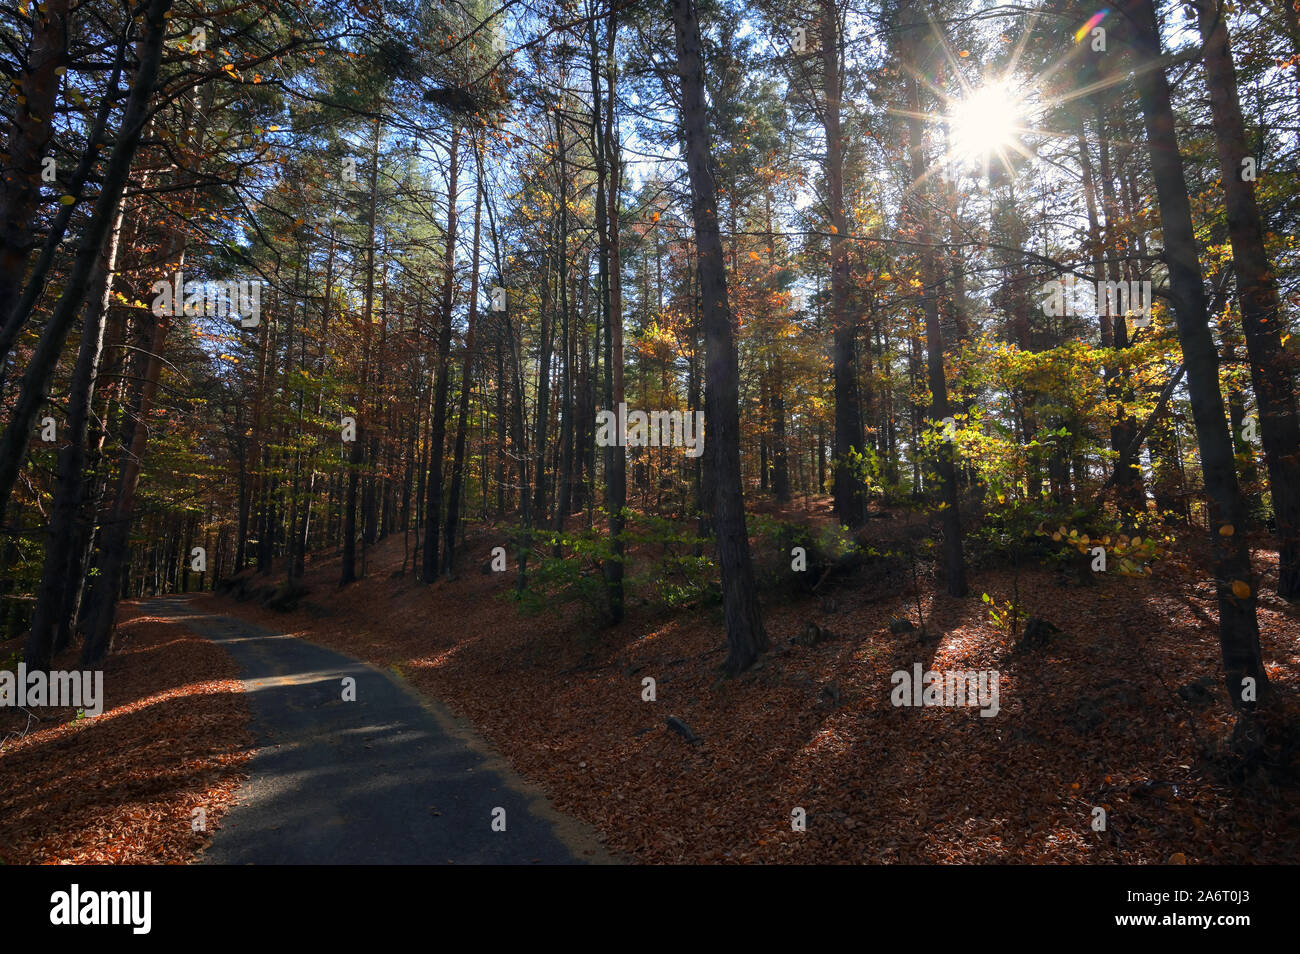 Empty Country Road Through Autumn Forest Stock Photo